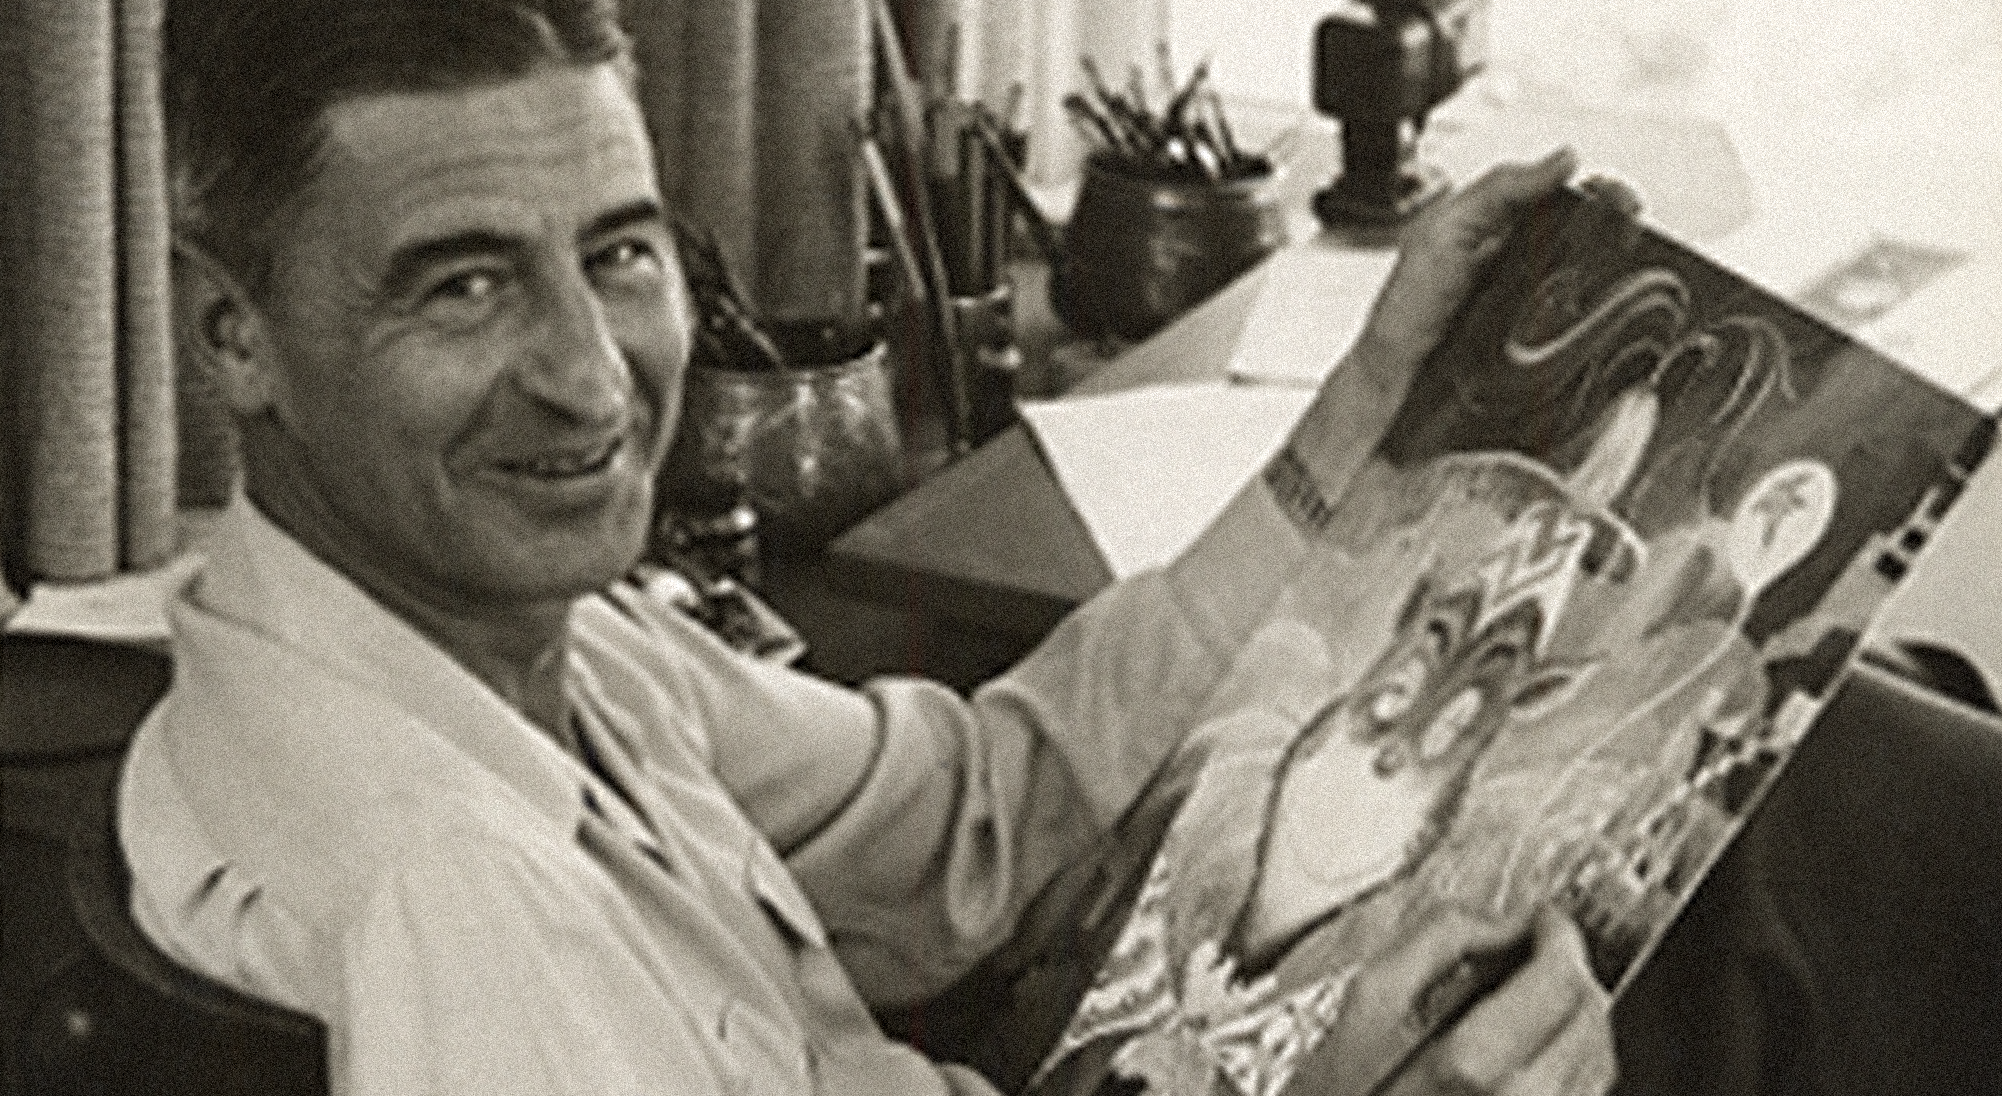 Ted Geisel (Dr. Seuss) working in his<br /> studio in La Jolla, California, in the 1950s